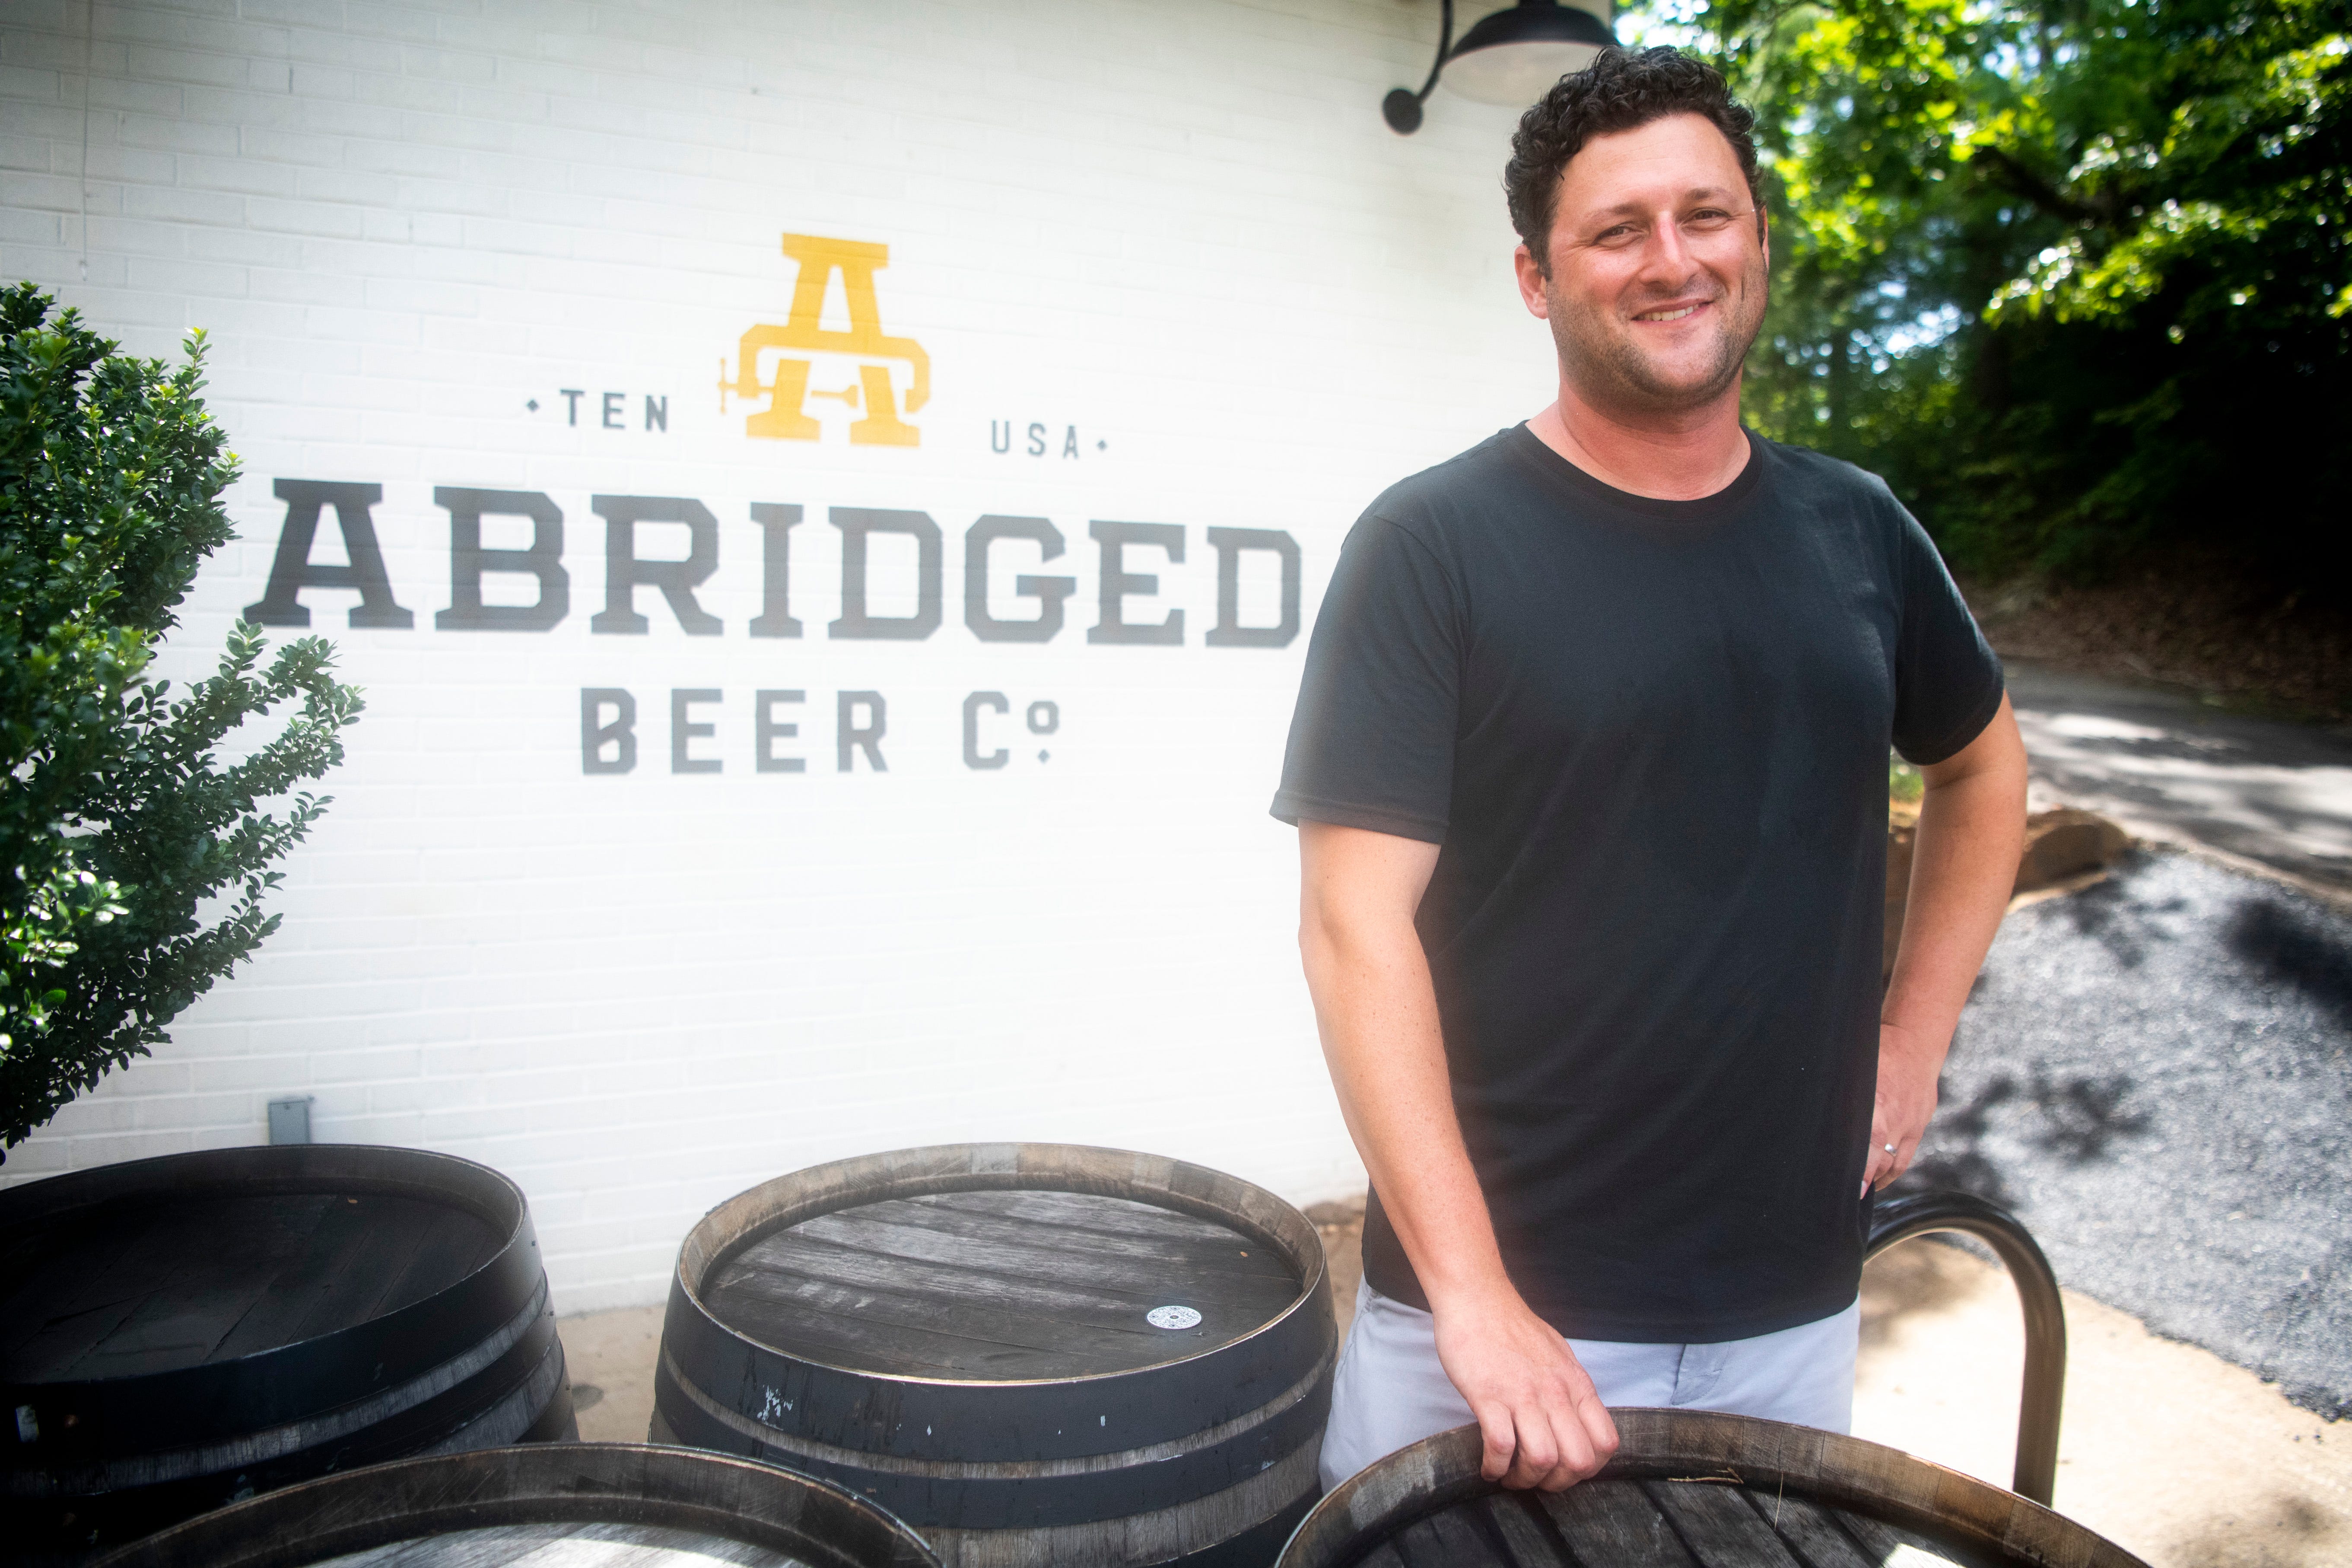 The people have spoken! Abridged Beer Company was selected as Knoxville's favorite brewery in the Knox News bracket challenge. Founder Jesse Bowers said every Knoxville brewery is doing its own unique thing, and that makes Knoxville's beer culture even better.